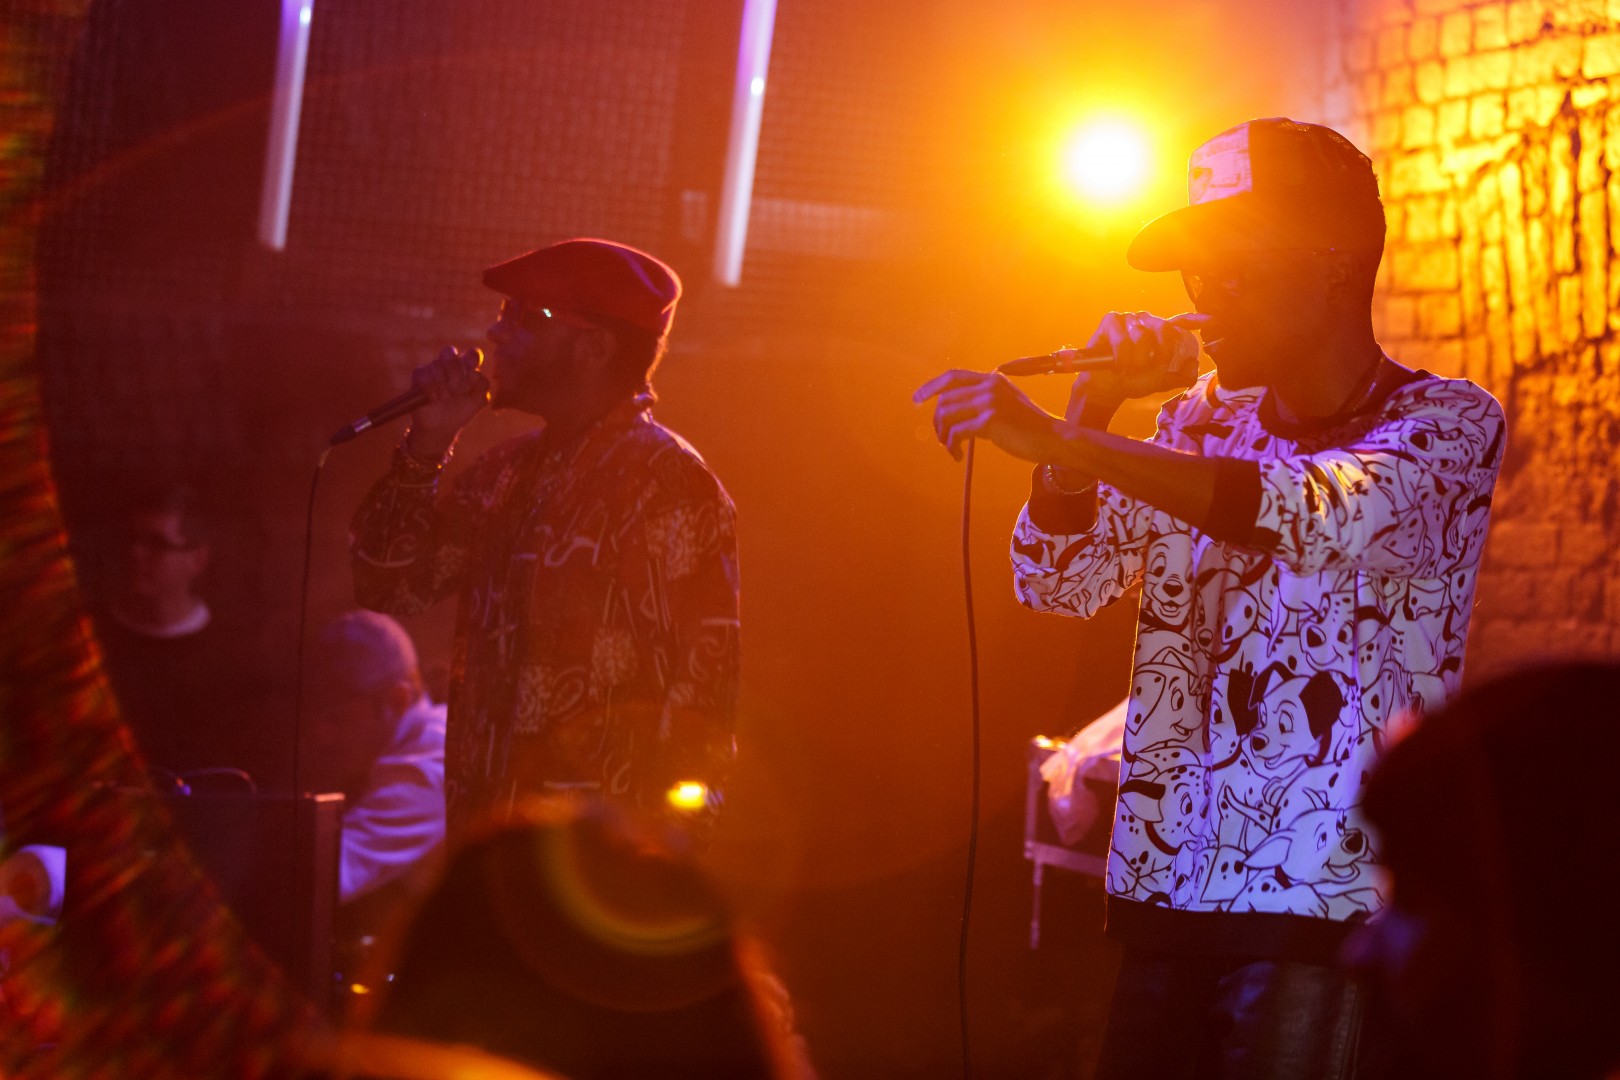 Camp Lo at Control Club in Bucharest on January 23, 2016 (9d49bfe6a3)